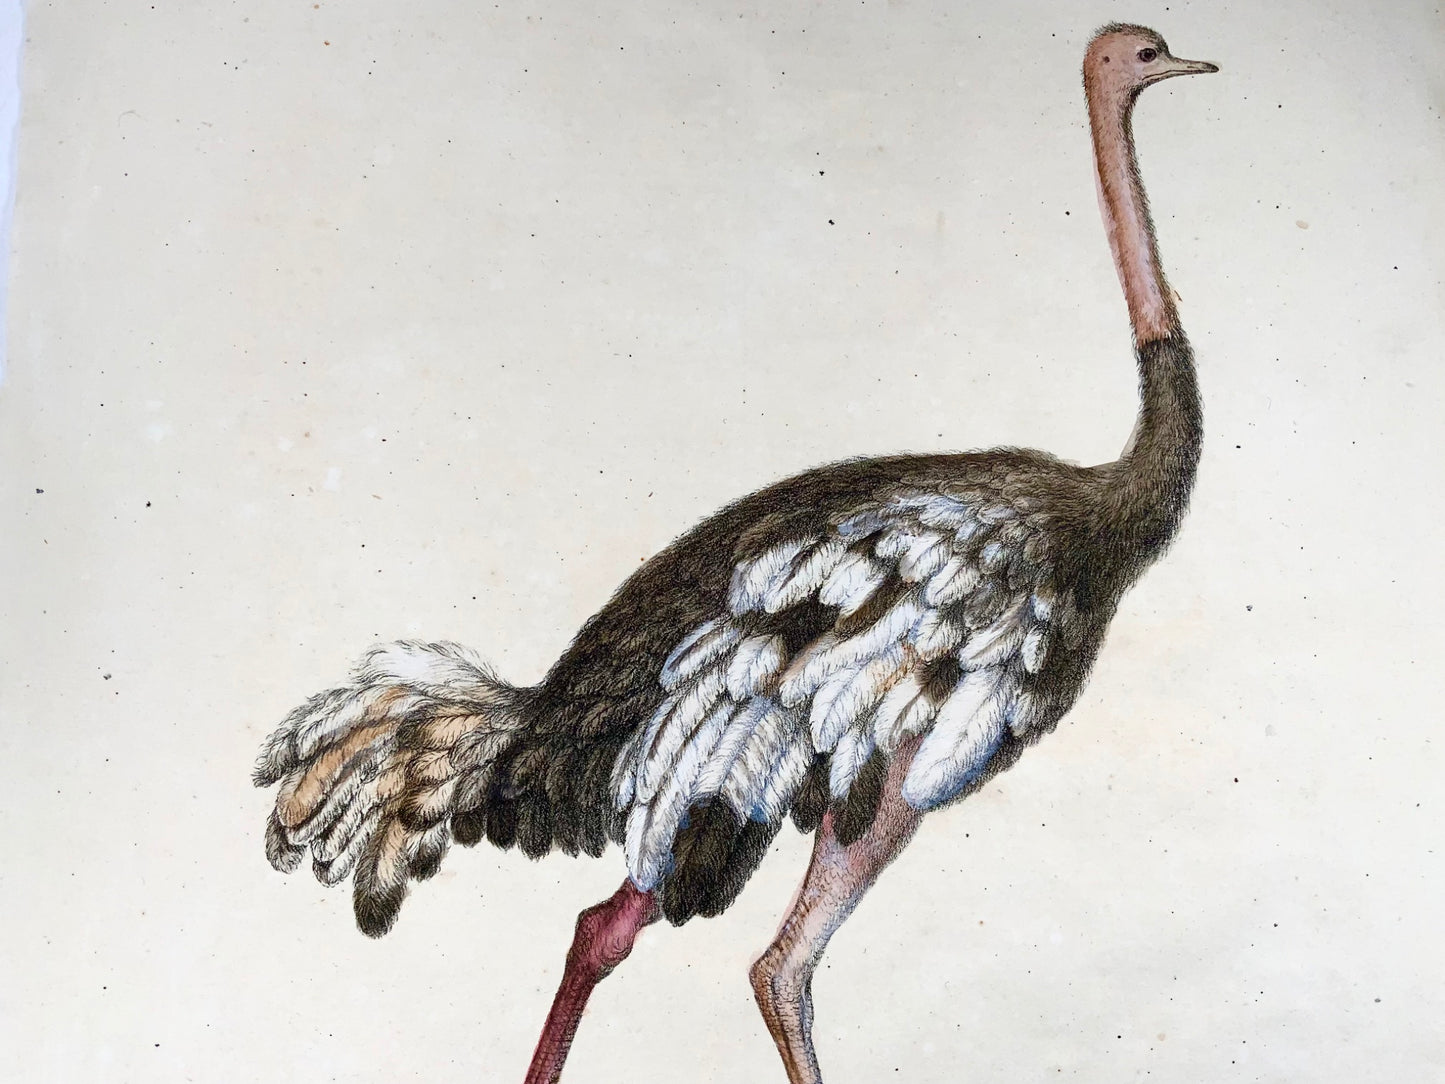 1816 Ostrich, Imperial folio 42.5 cm, Brodtmann, incunabula of lithography